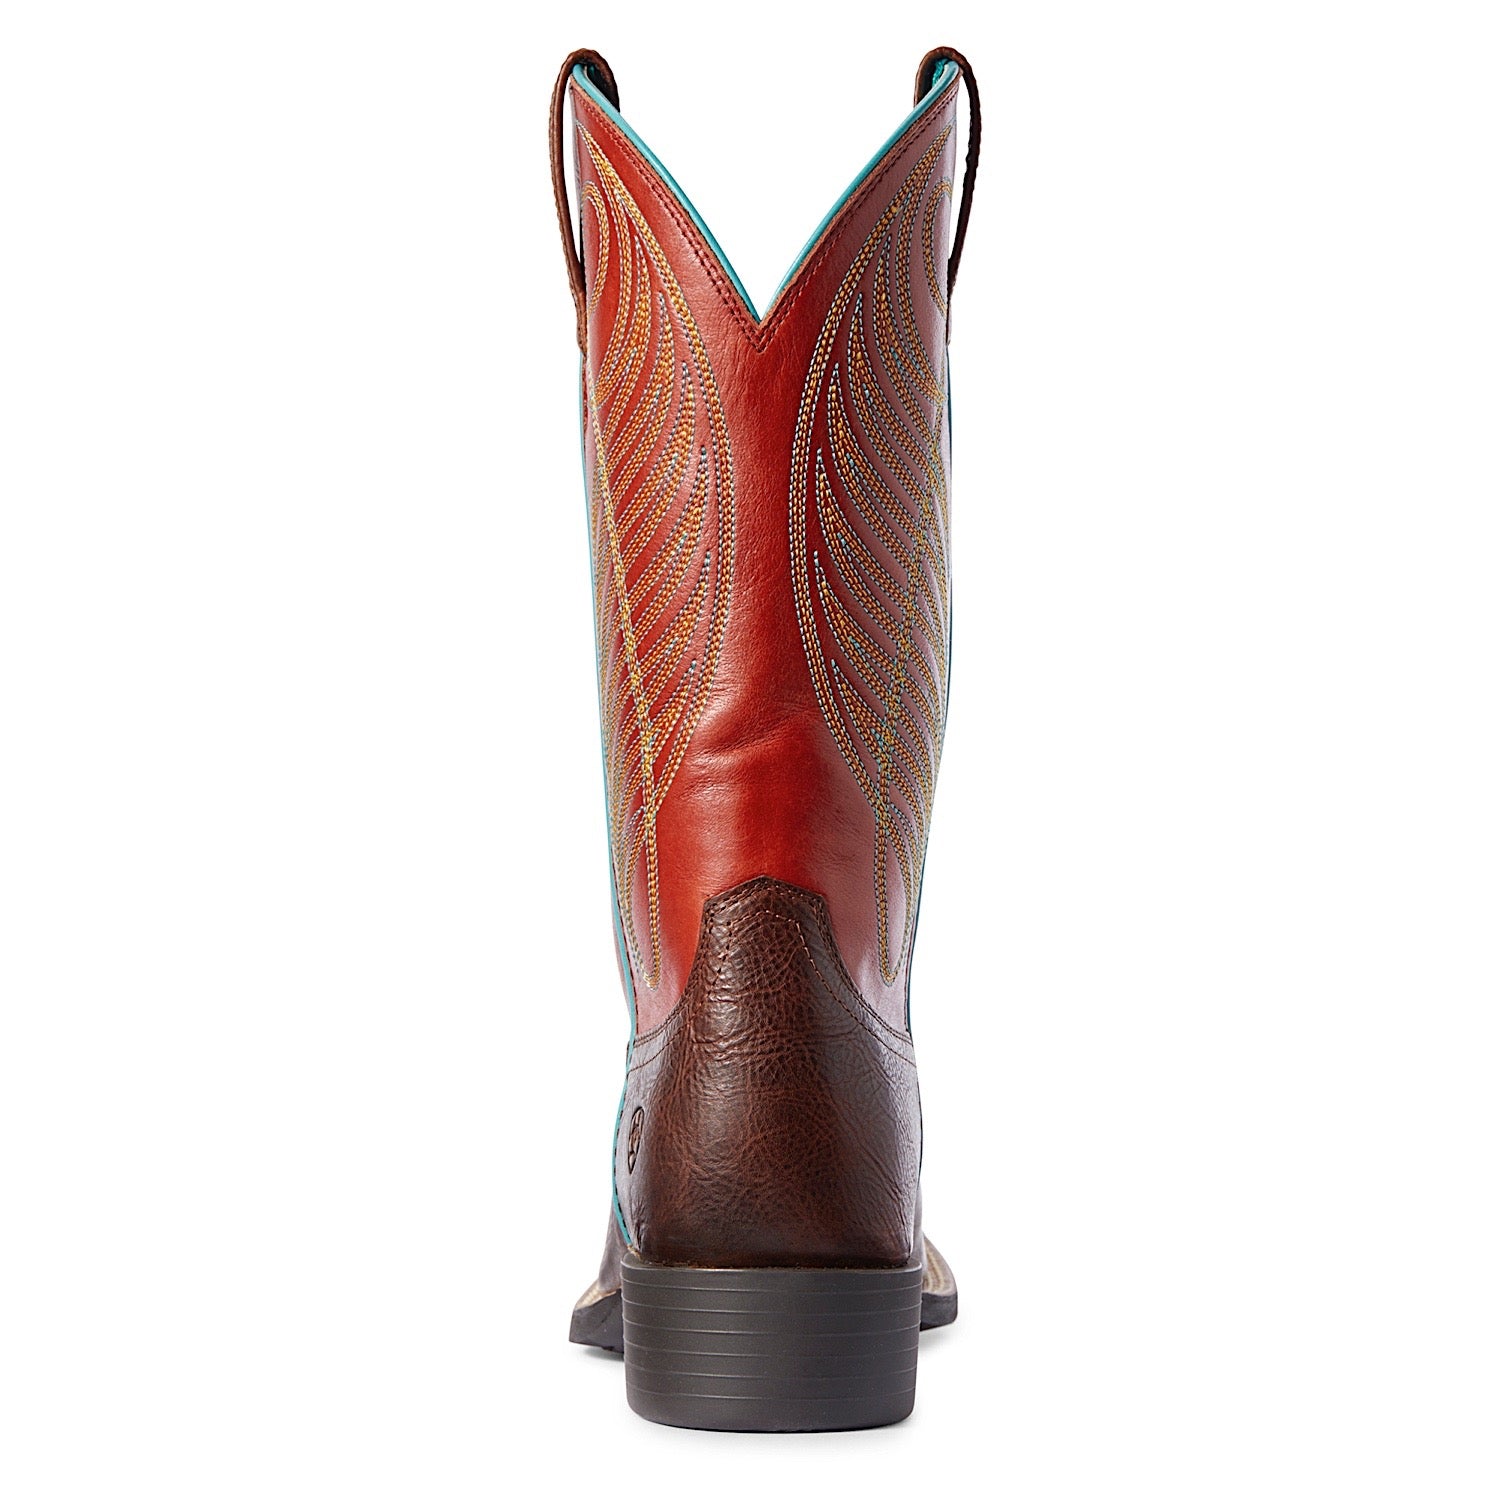 womens red square toe cowboy boots